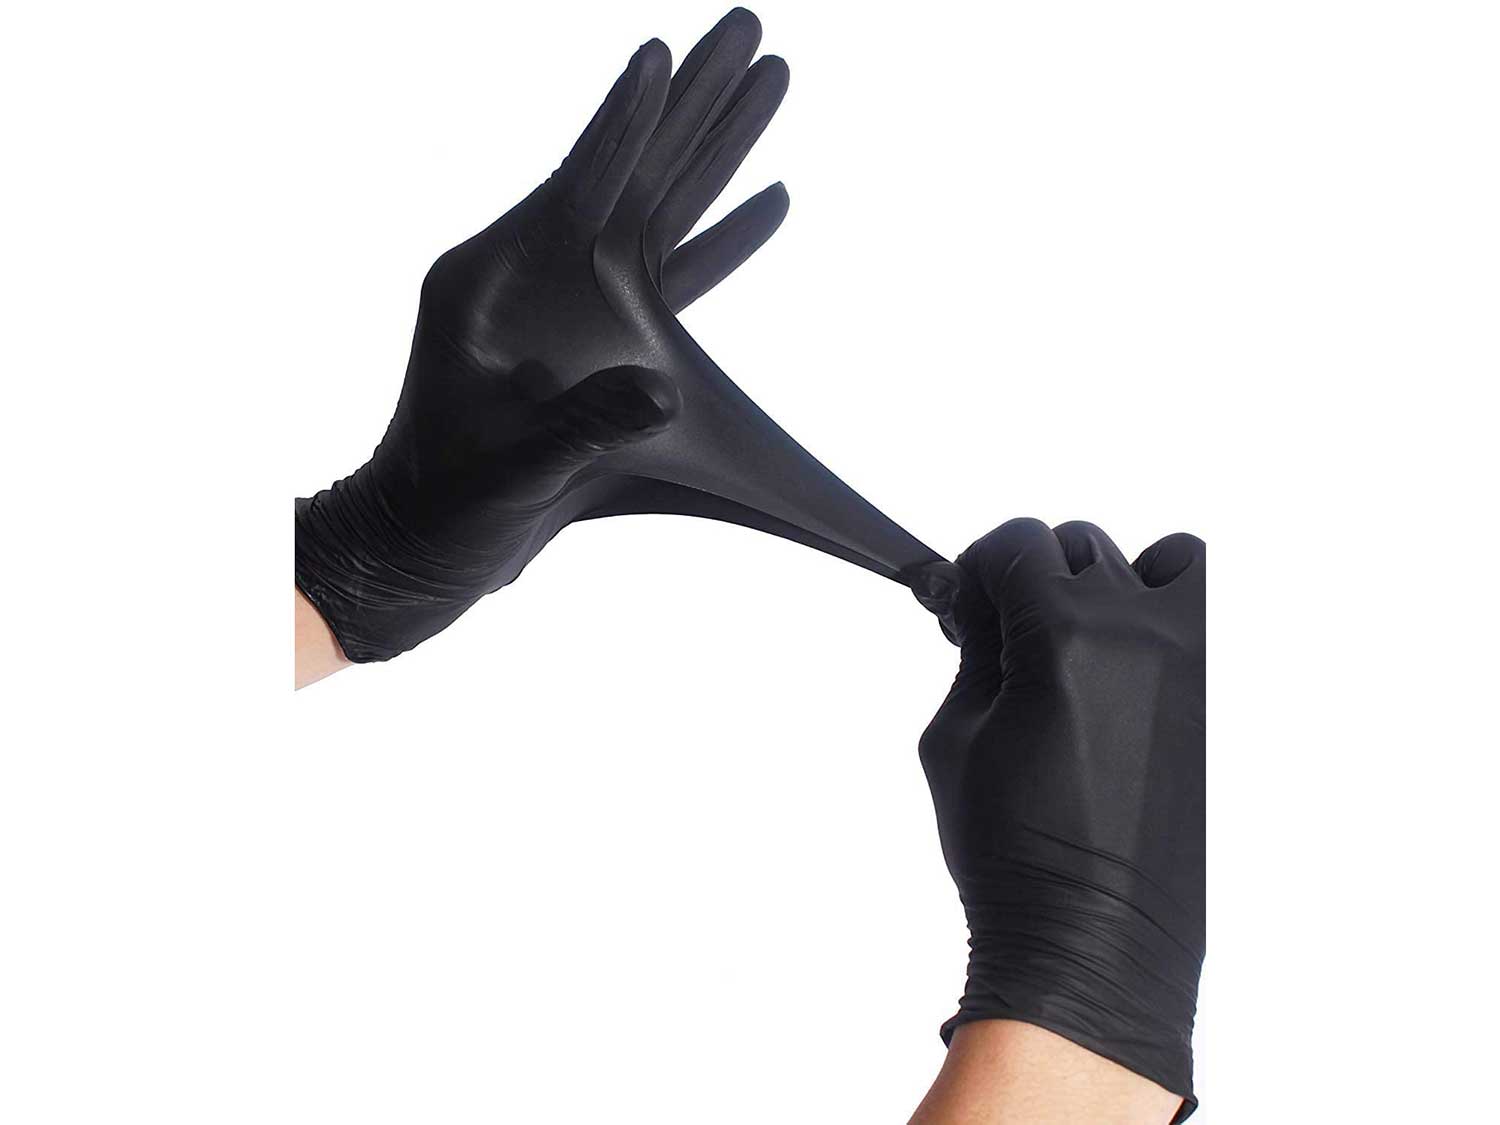 Industrial Grade Disposable Nitrile Gloves - Powder-Free, Heavy Duty, Disposable for Professional, Healthcare, Medical, Food Handling, 5 MIL, Large, Black, Pack of 100